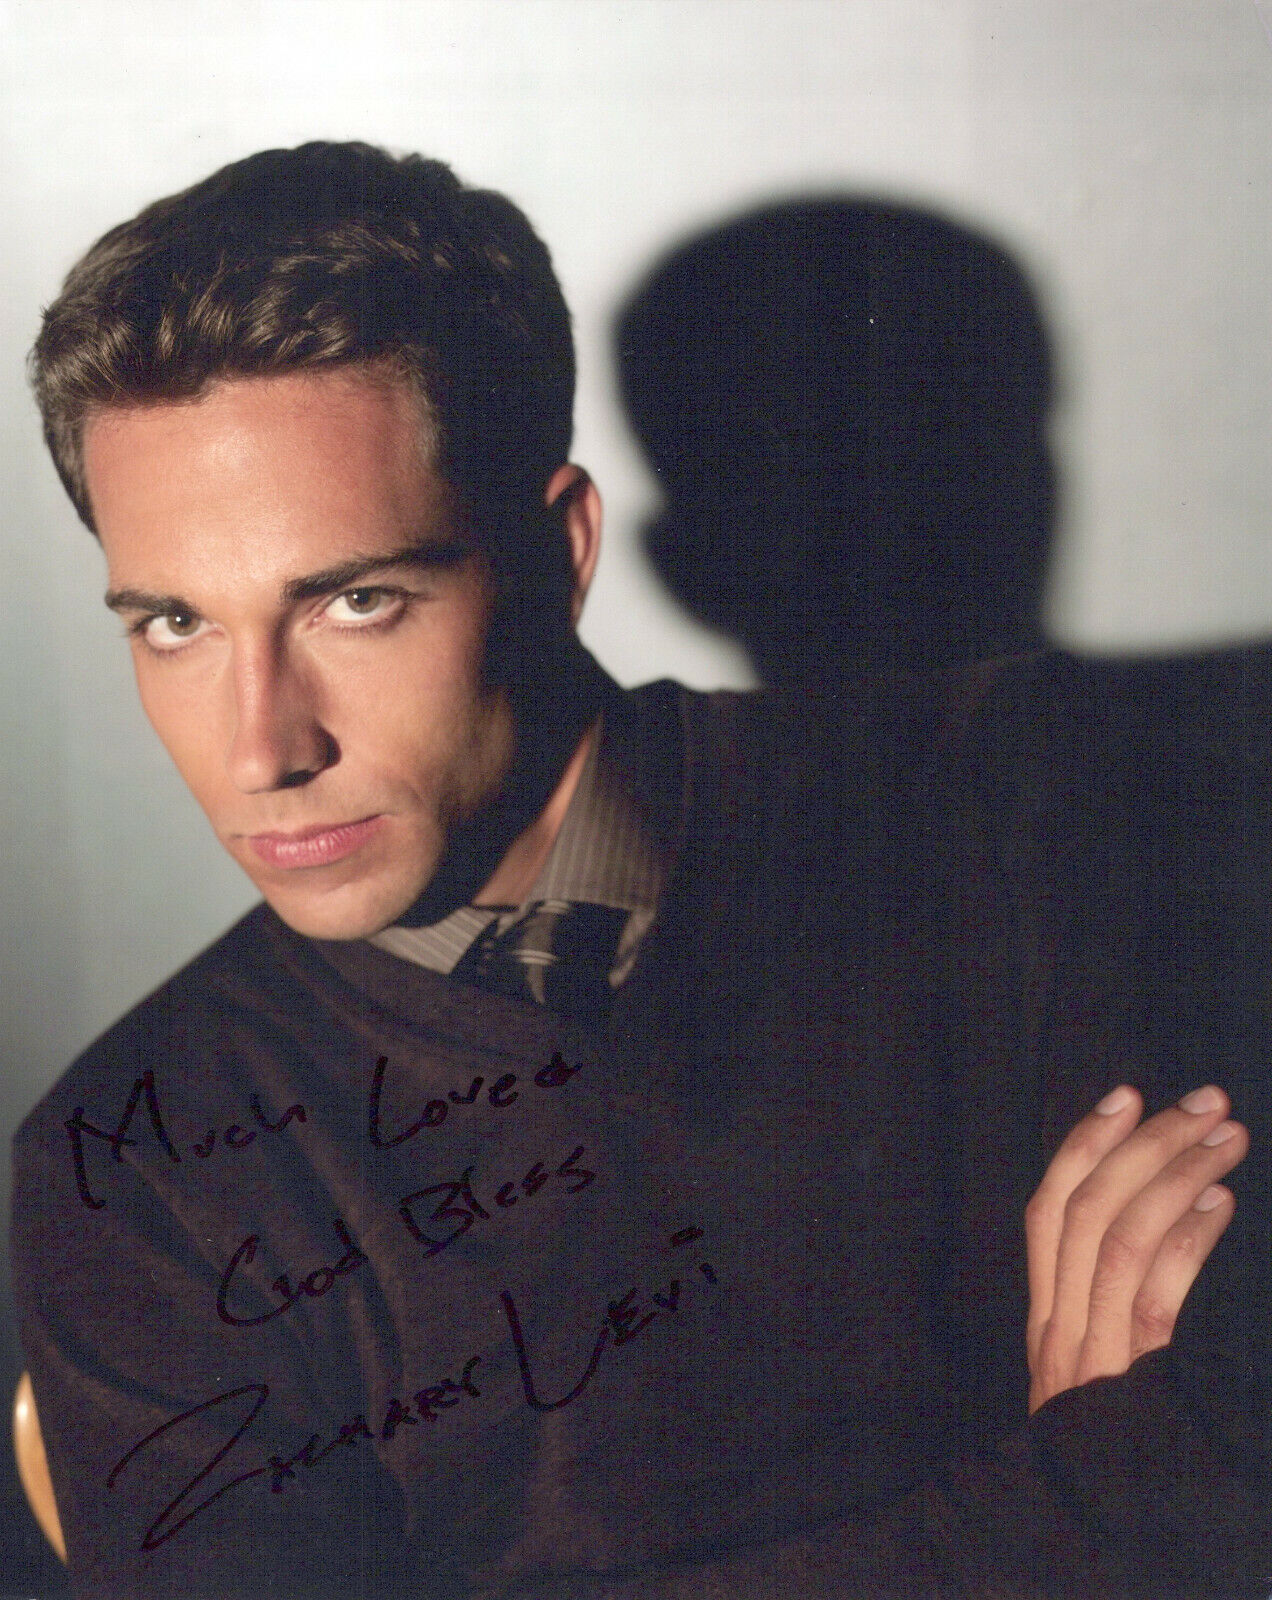 Zachary Levi head shot autographed Photo Poster painting signed 8x10 #5 full signature very rare